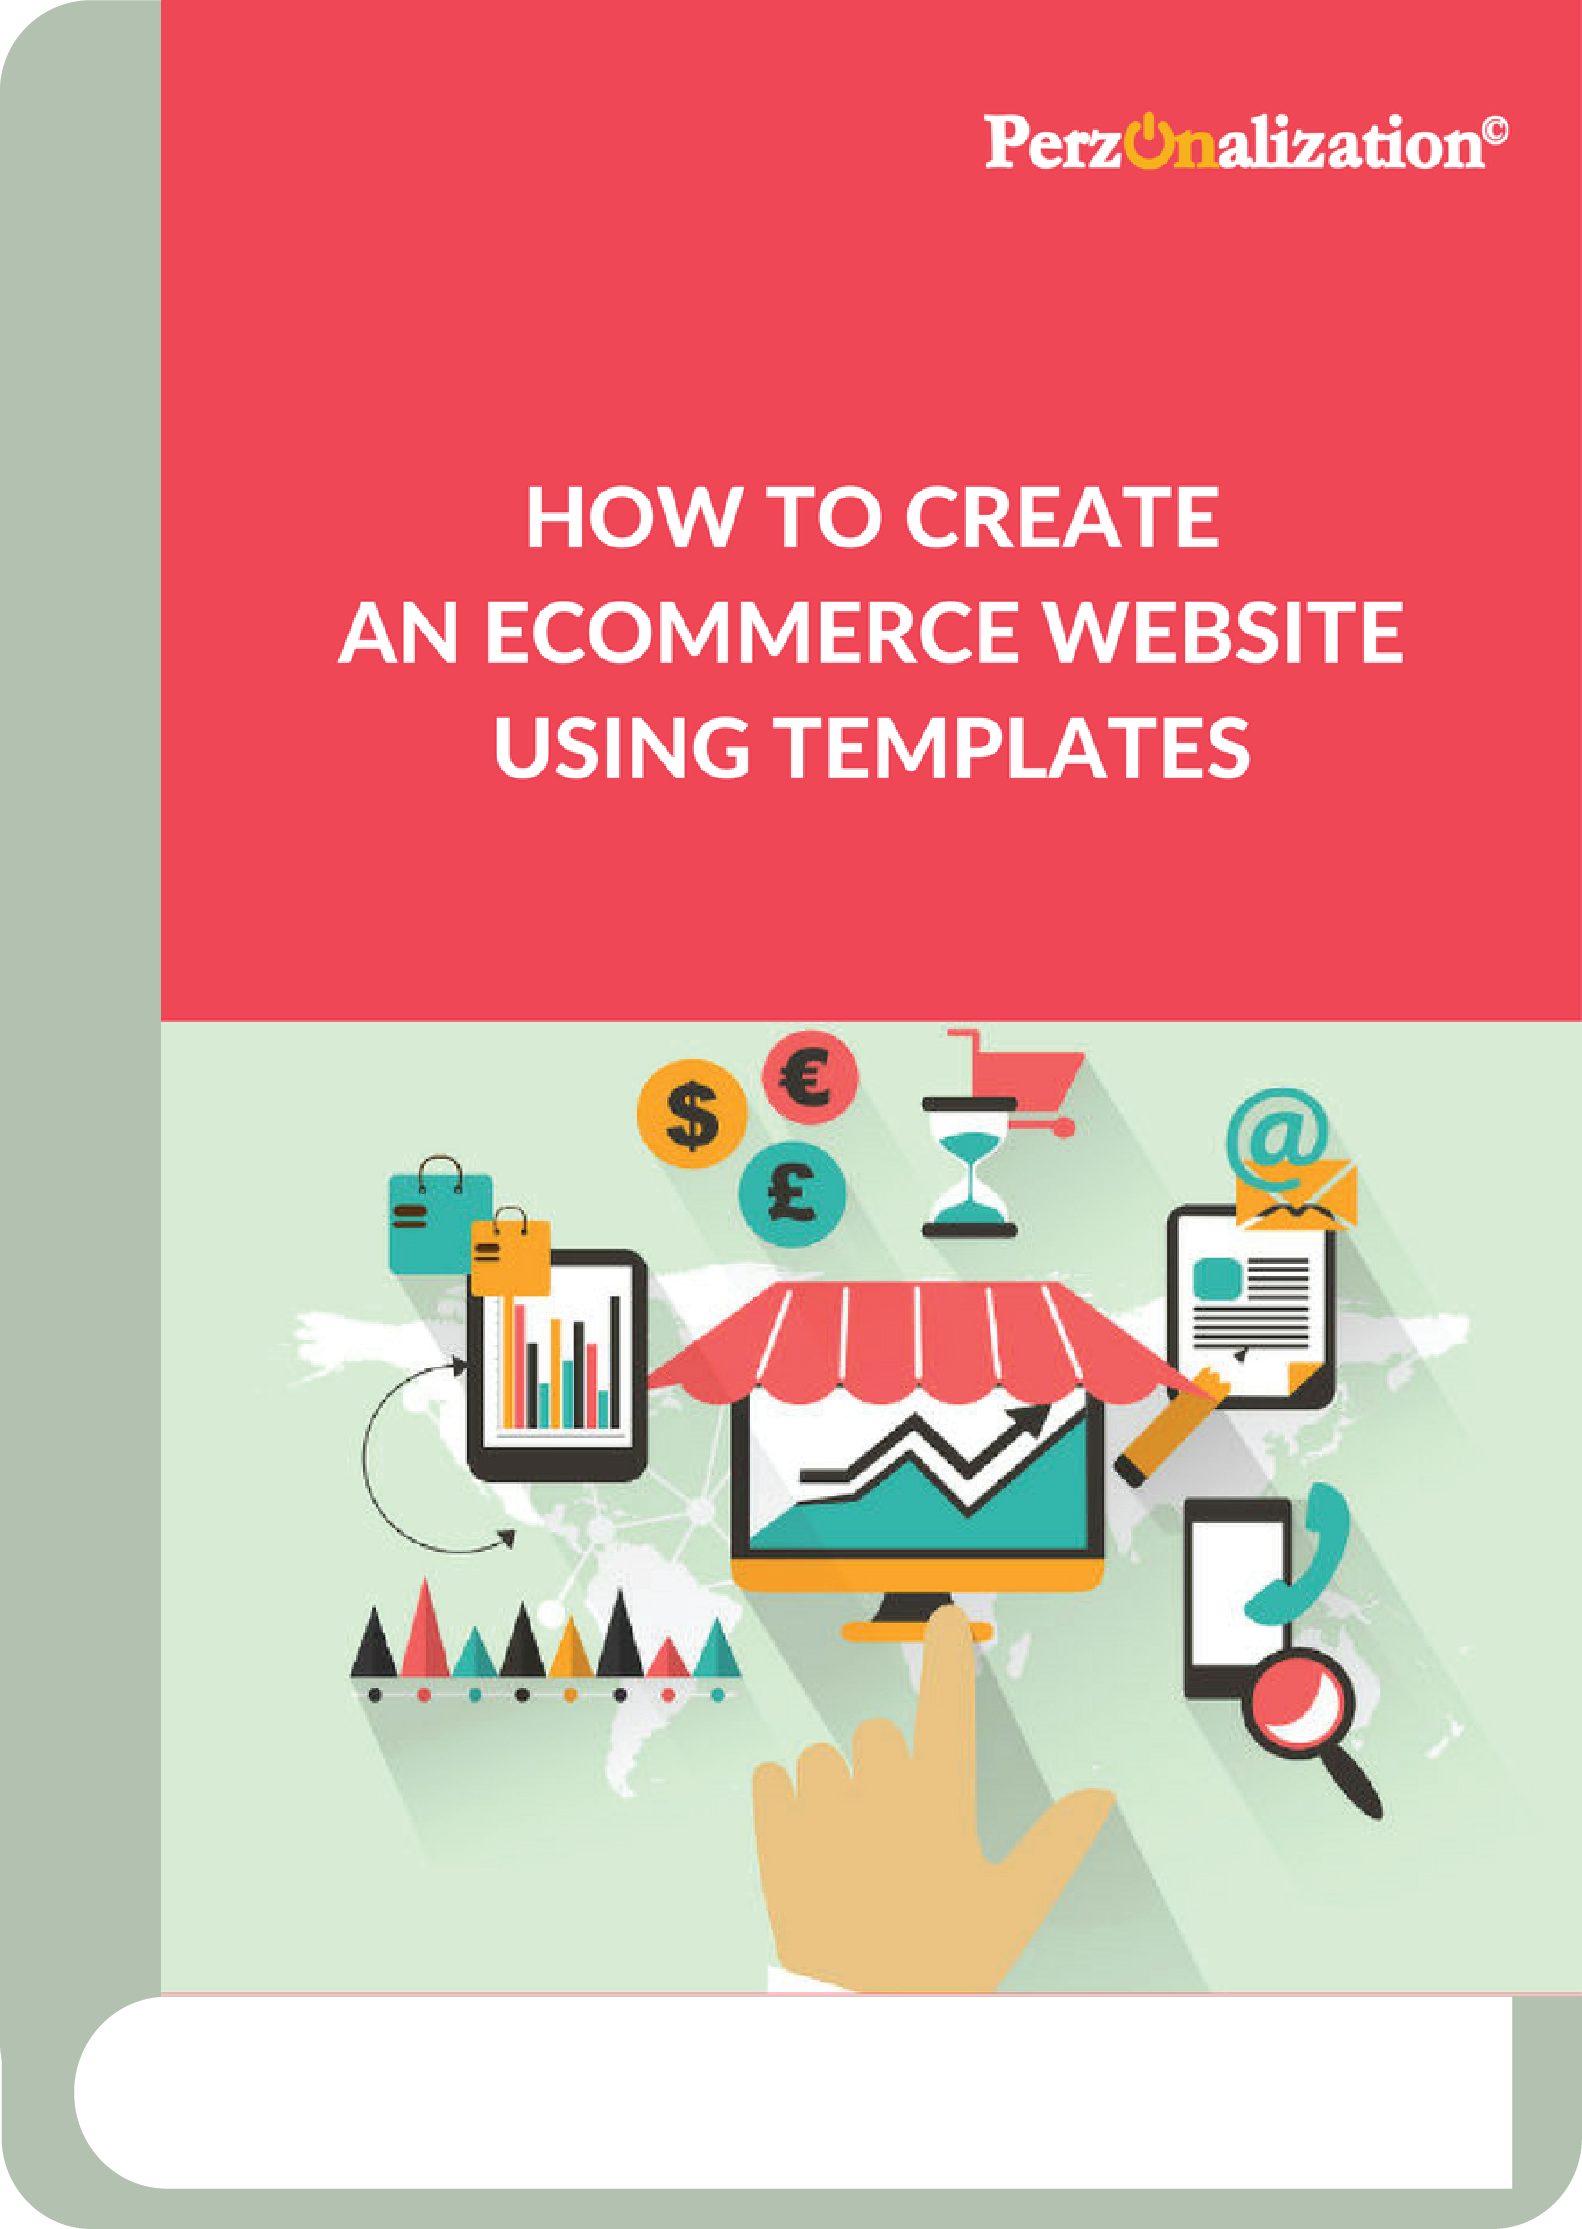 To create a clean, simple and eye-grabbing eCommerce website, you need best-in-class eCommerce themes. Find out more in this free eBook on OpenCart and PrestaShop themes!